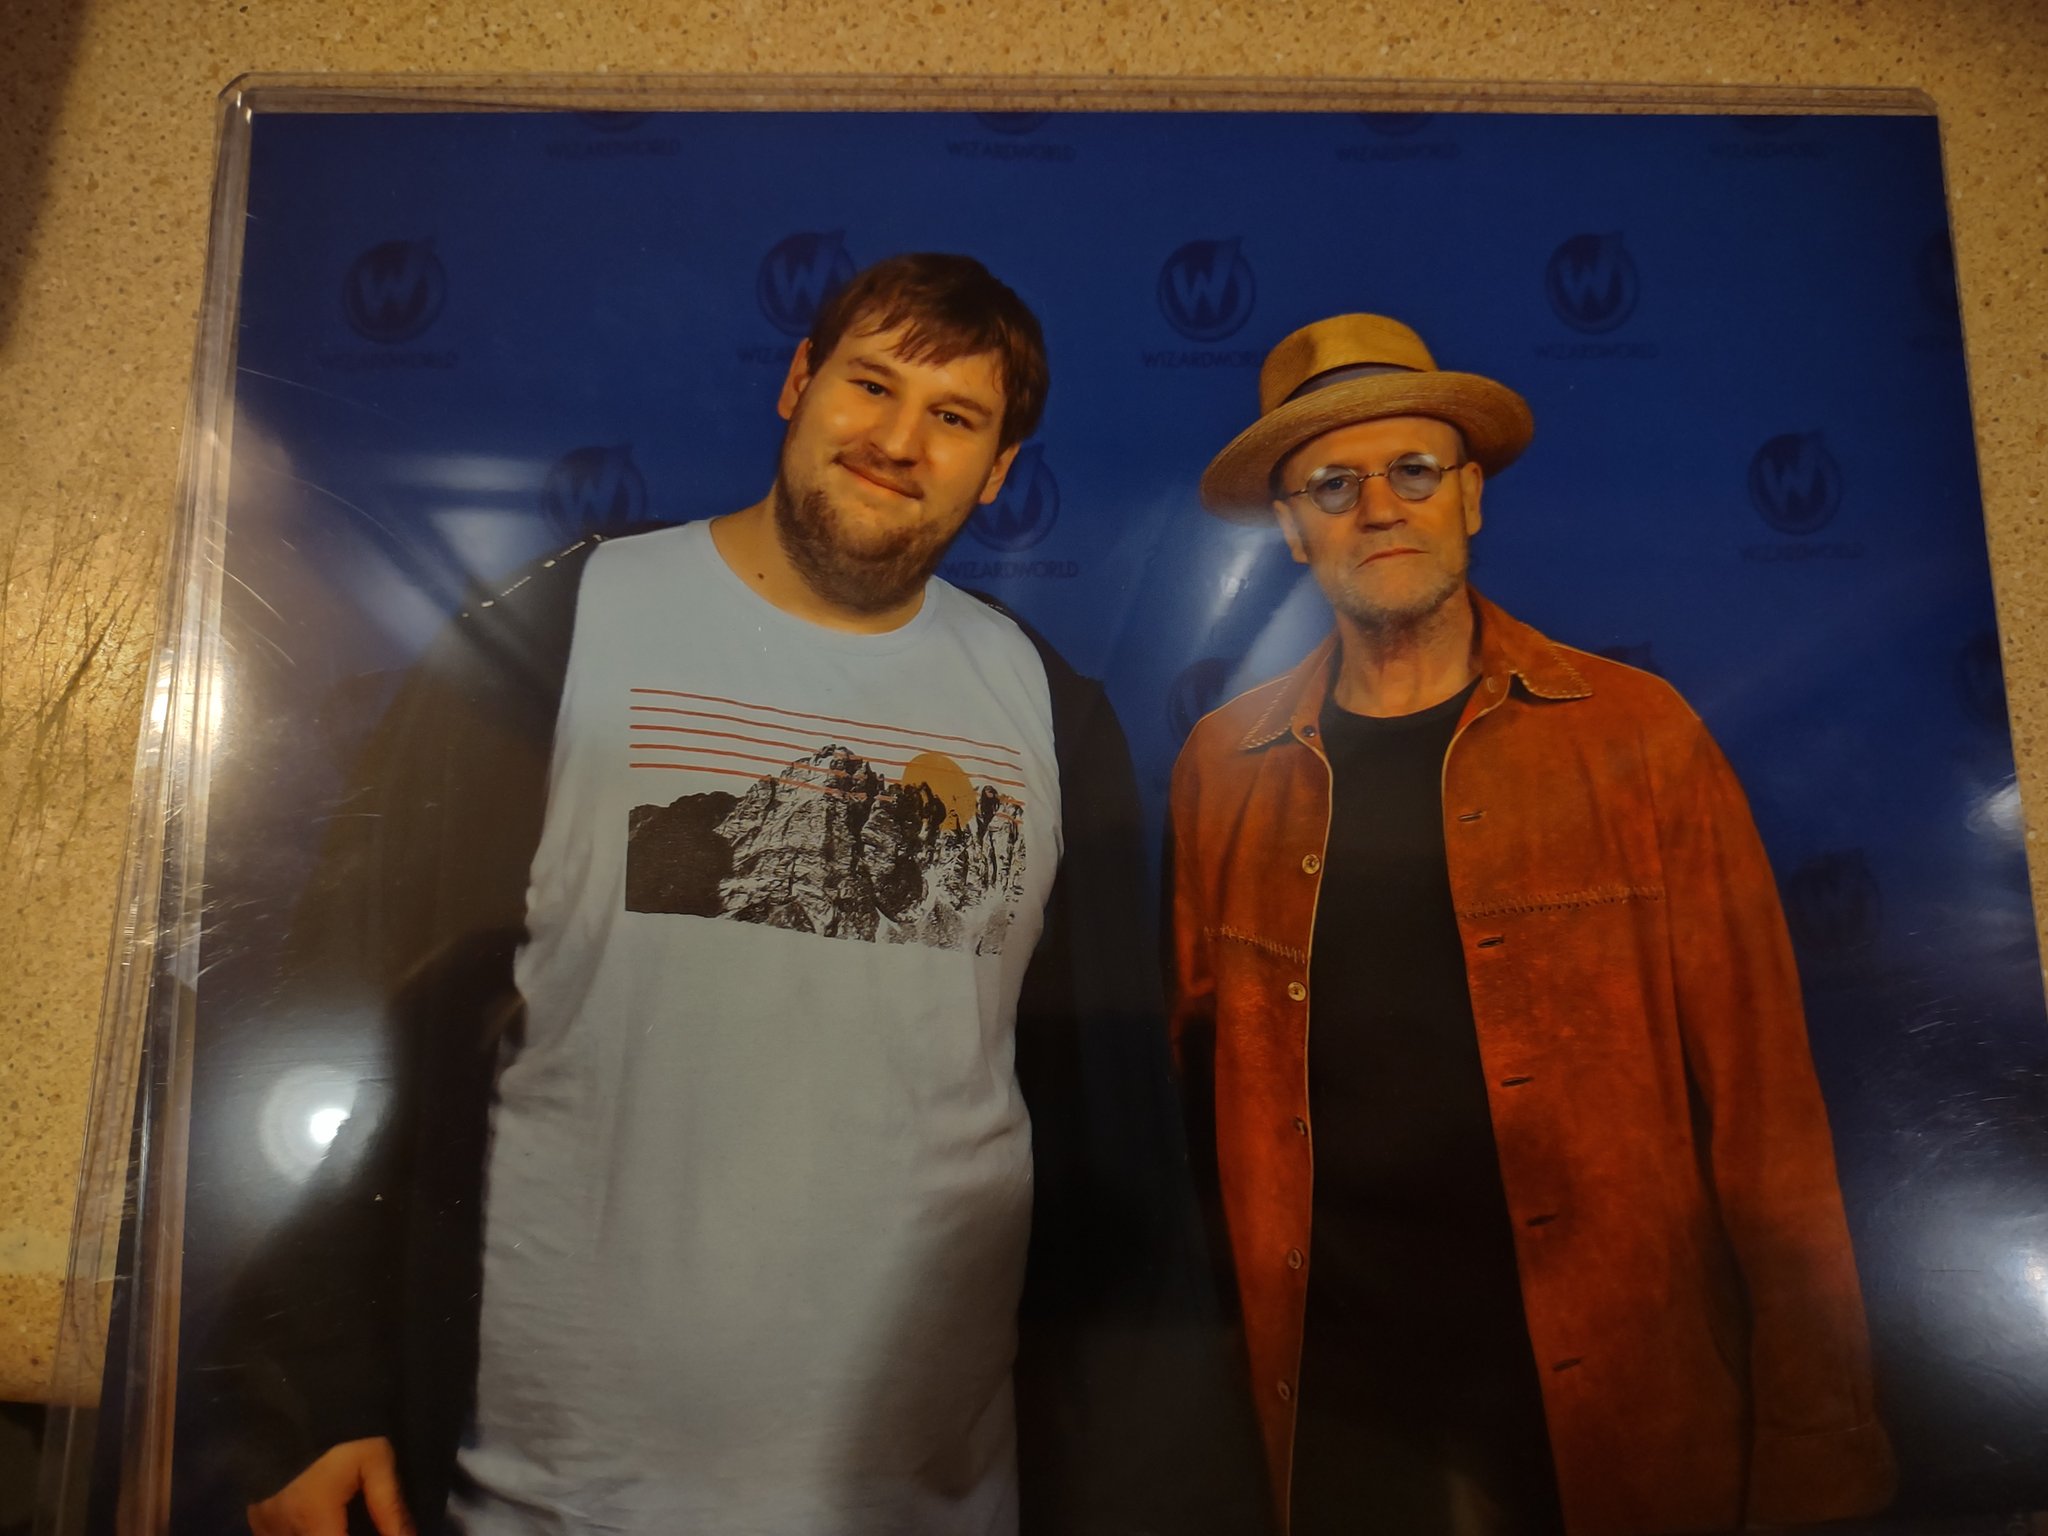 Happy birthday Michael Rooker. Glad I got a picture with you on my birthday. 